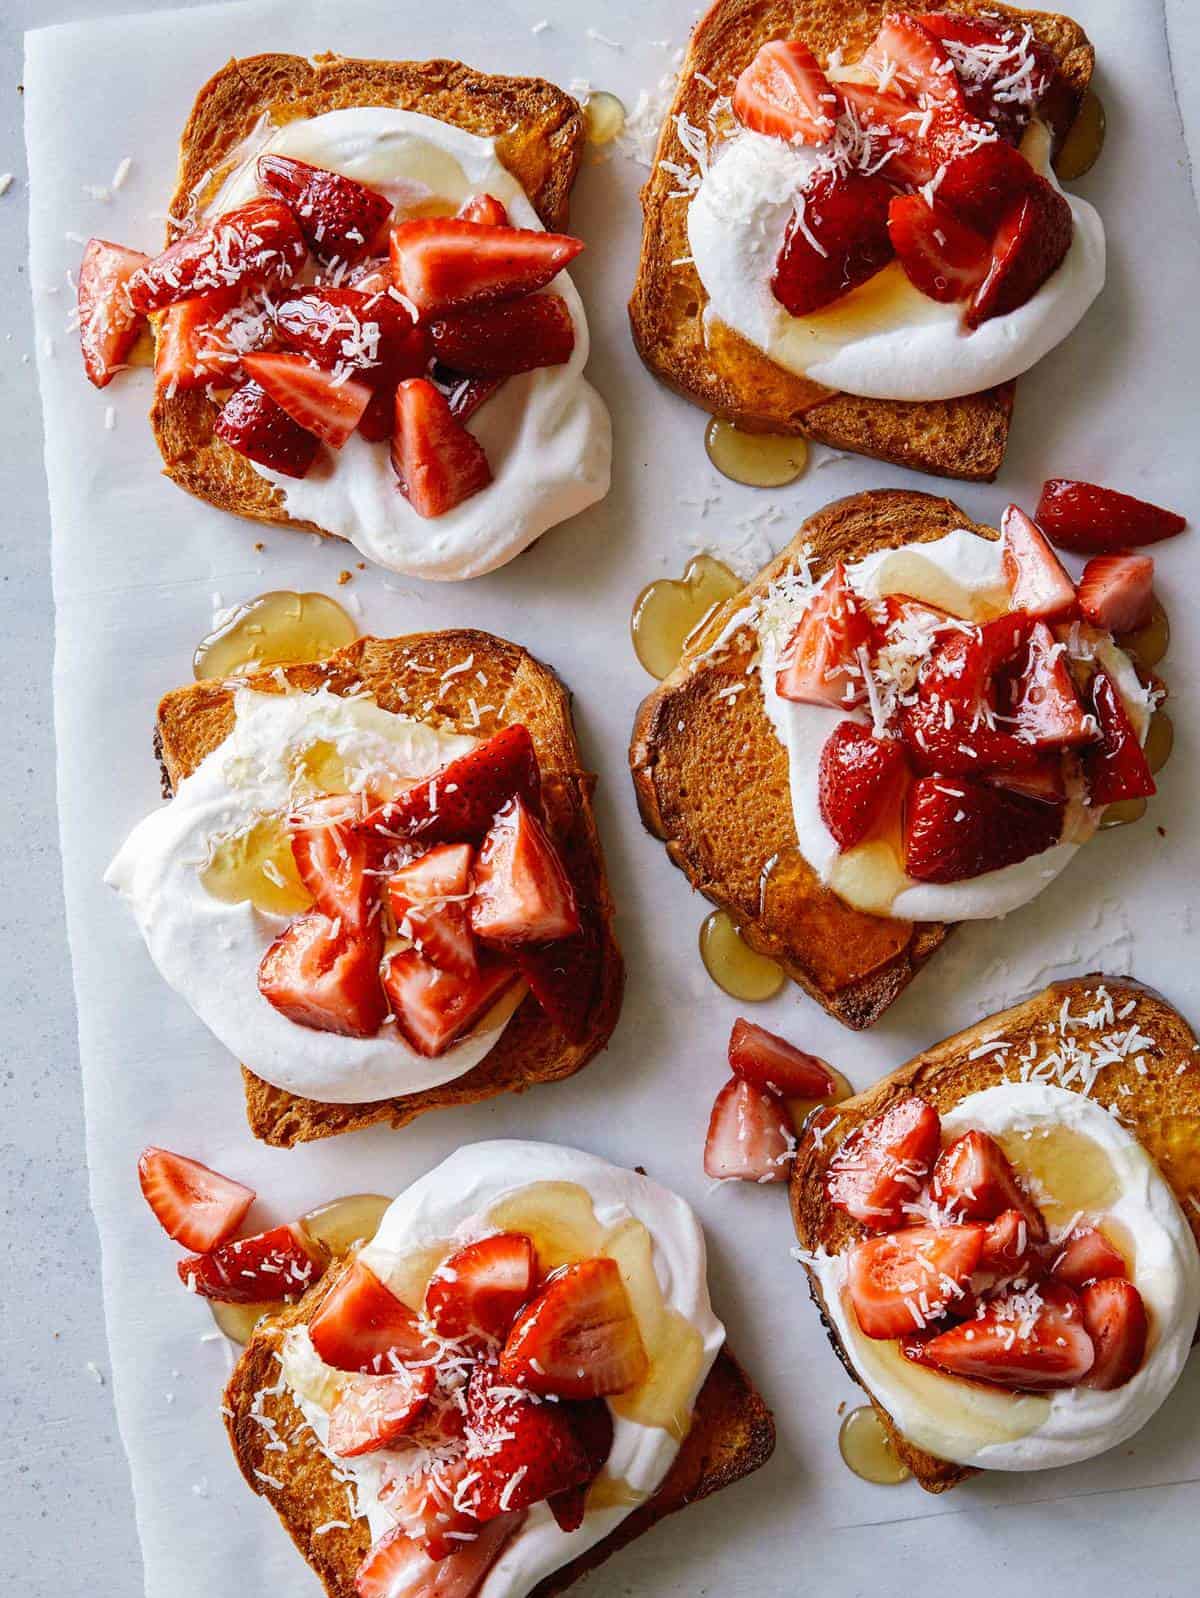 Honey brick toast topped with whipped cream and strawberries.